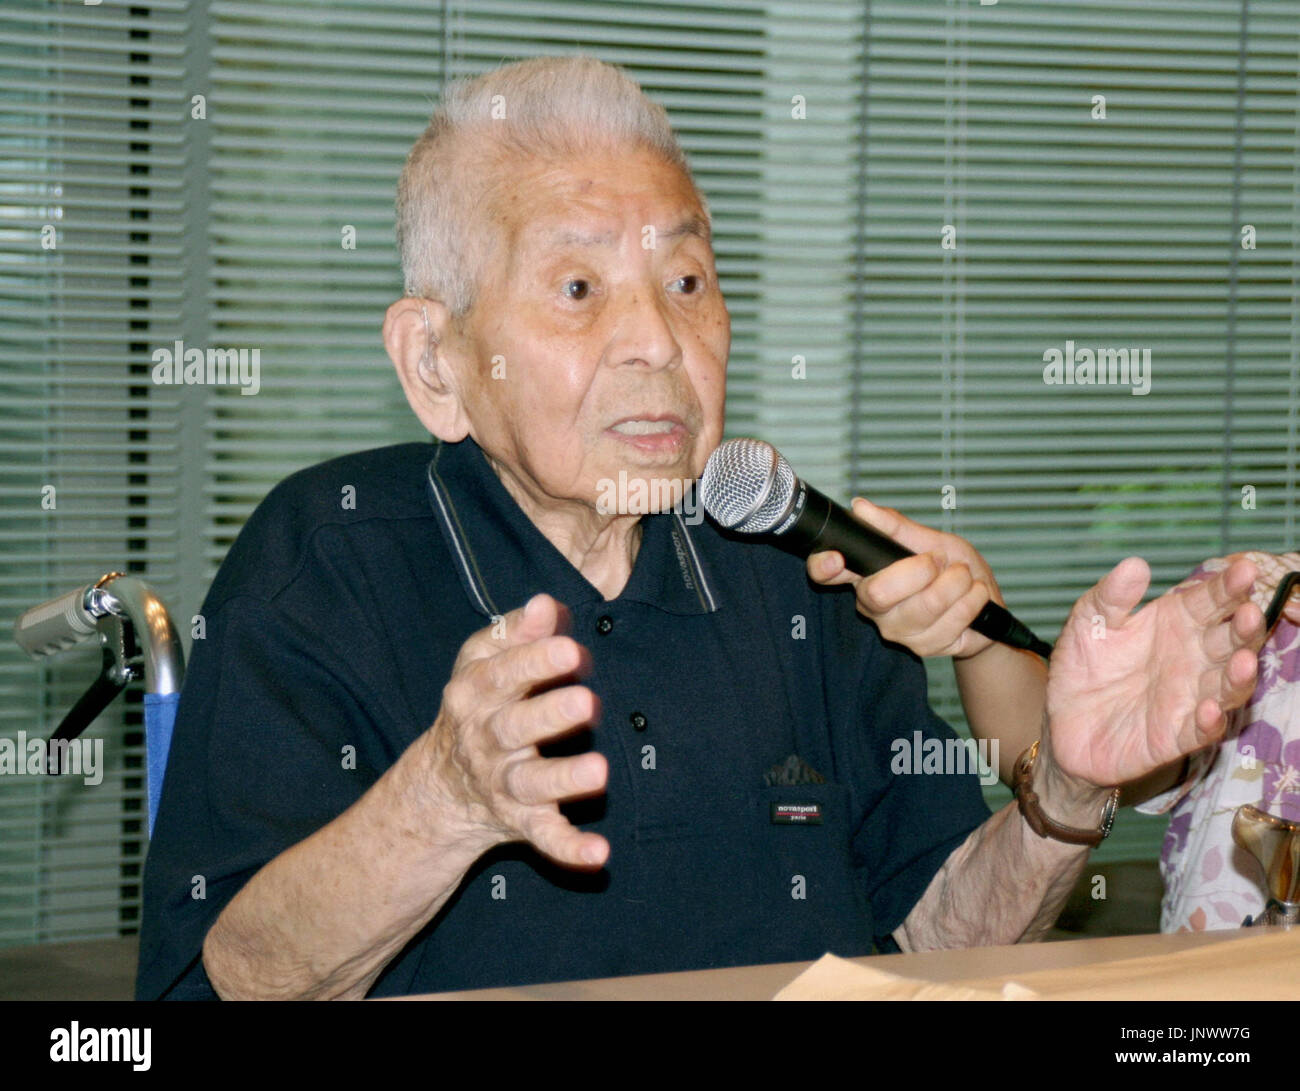 TOKYO, Japan - Photo shows the late Tsutomu Yamaguchi speaking in Nagasaki in June 2009 about his experience of surviving the 1945 atomic bombings of Hiroshima and Nagasaki. The Japanese Embassy in London has sent a written protest against the BBC for introducing him as ''The Unluckiest Man in the World'' in its TV program that aired on Dec. 17, 2010, with the show's personalities and the audience laughing. A producer of the show has apologized via e-mail. (Kyodo) Stock Photo